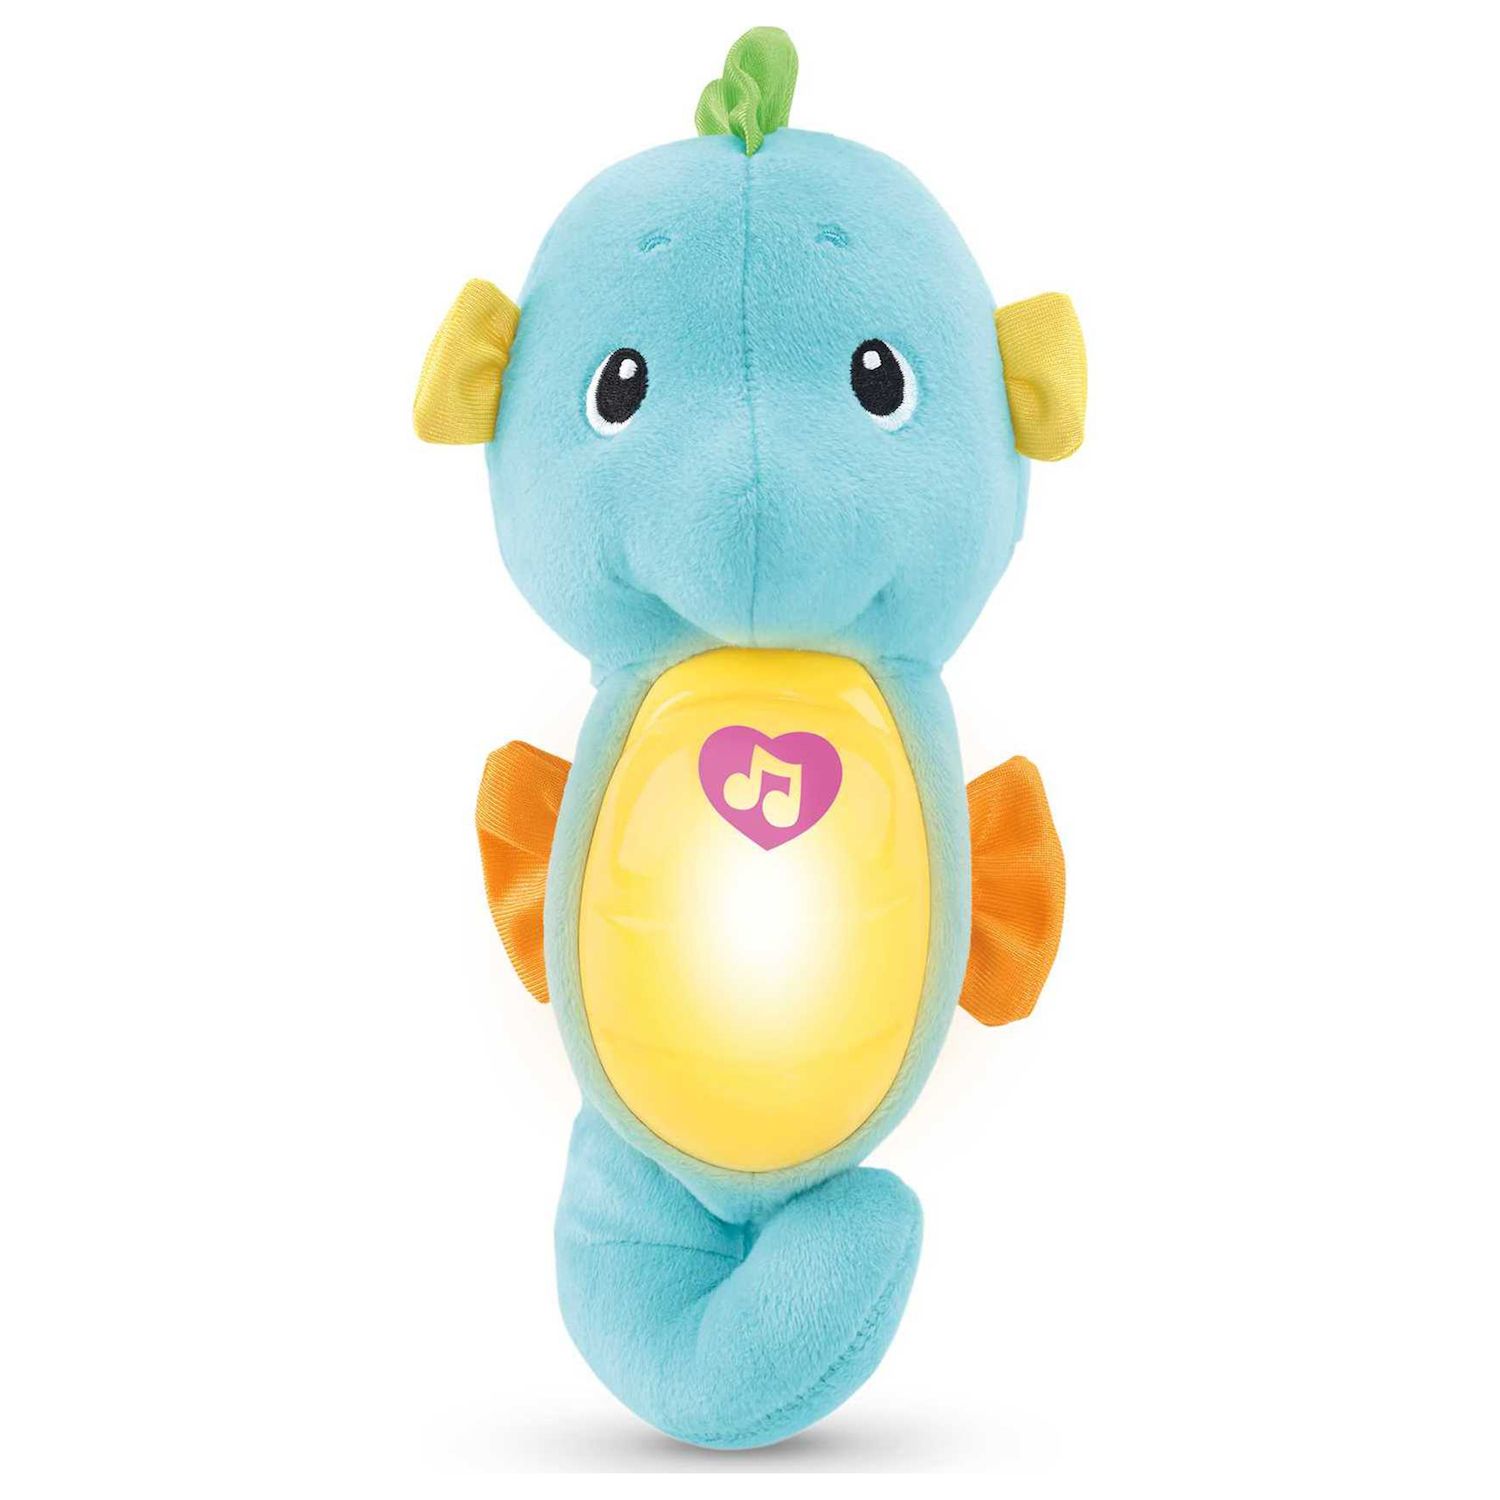 fisher price lullaby toy